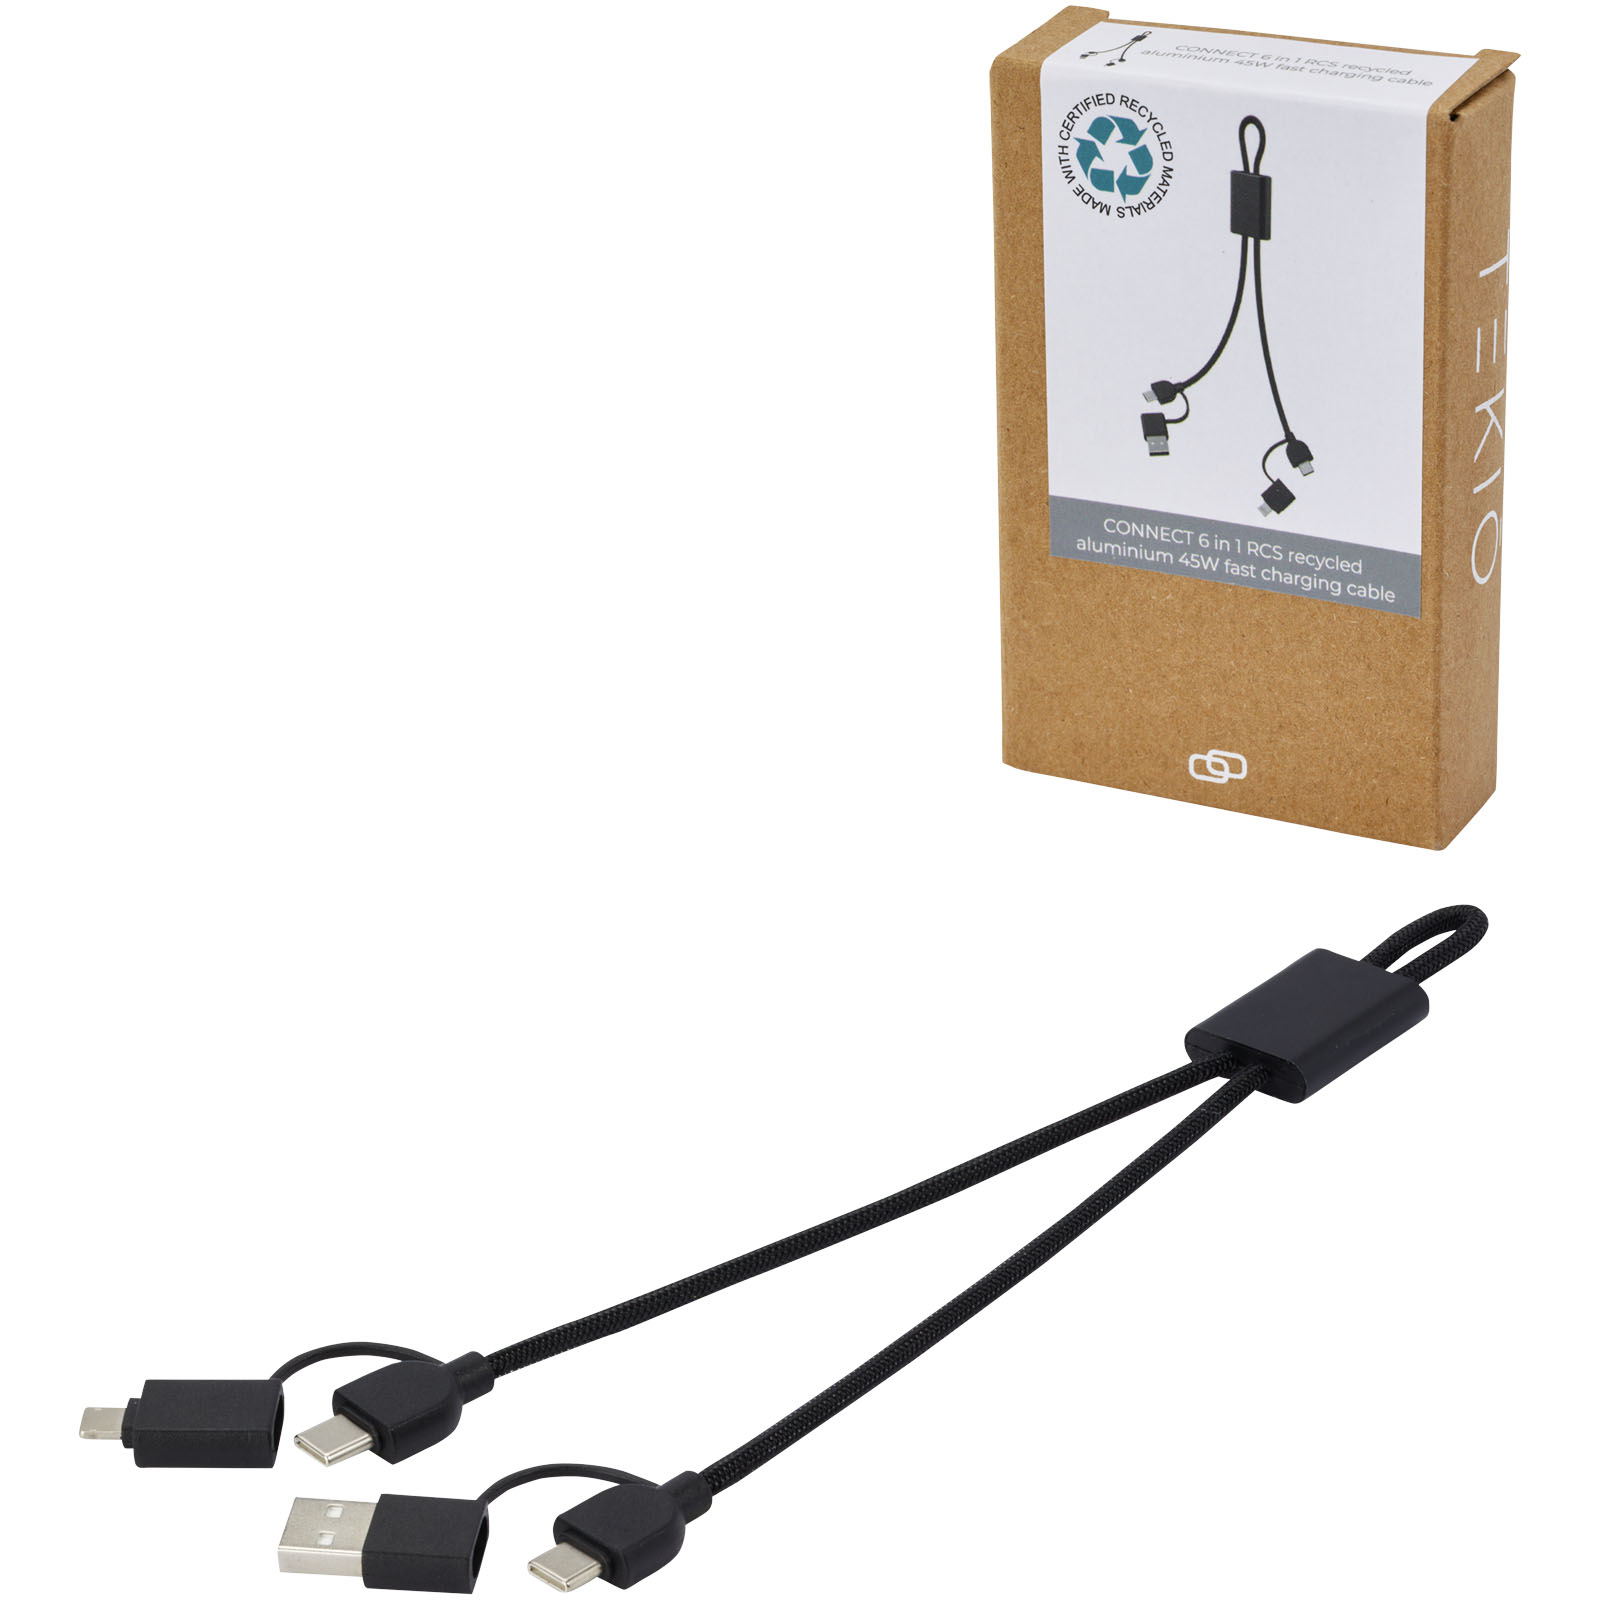 Technology - Connect 6-in-1 RCS recycled aluminium 45W quick charge & data transfer cable